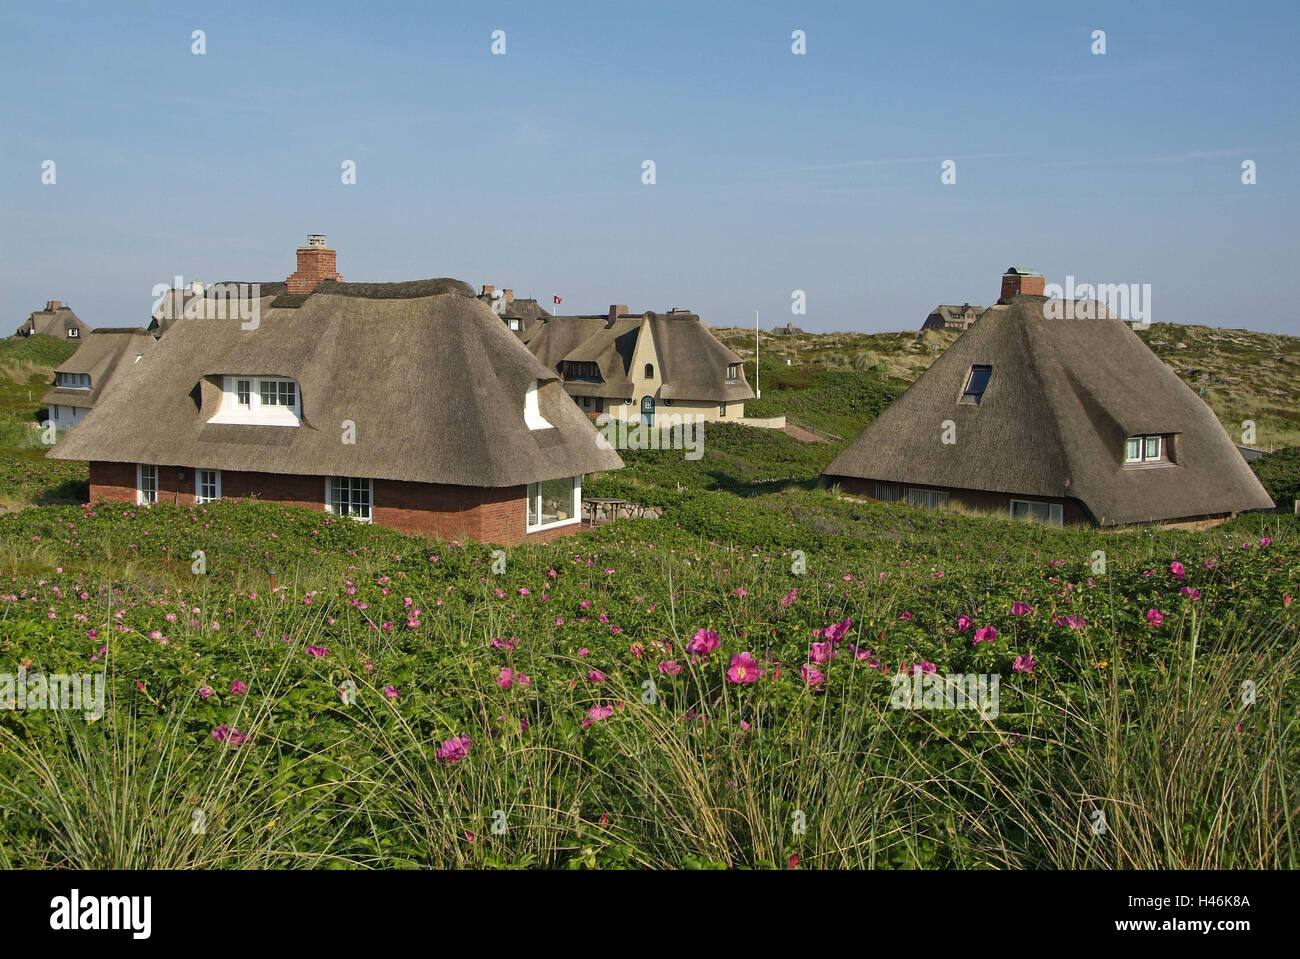 Germany, Schleswig - Holstein, island Sylt, list, thatched-roof houses, Stock Photo